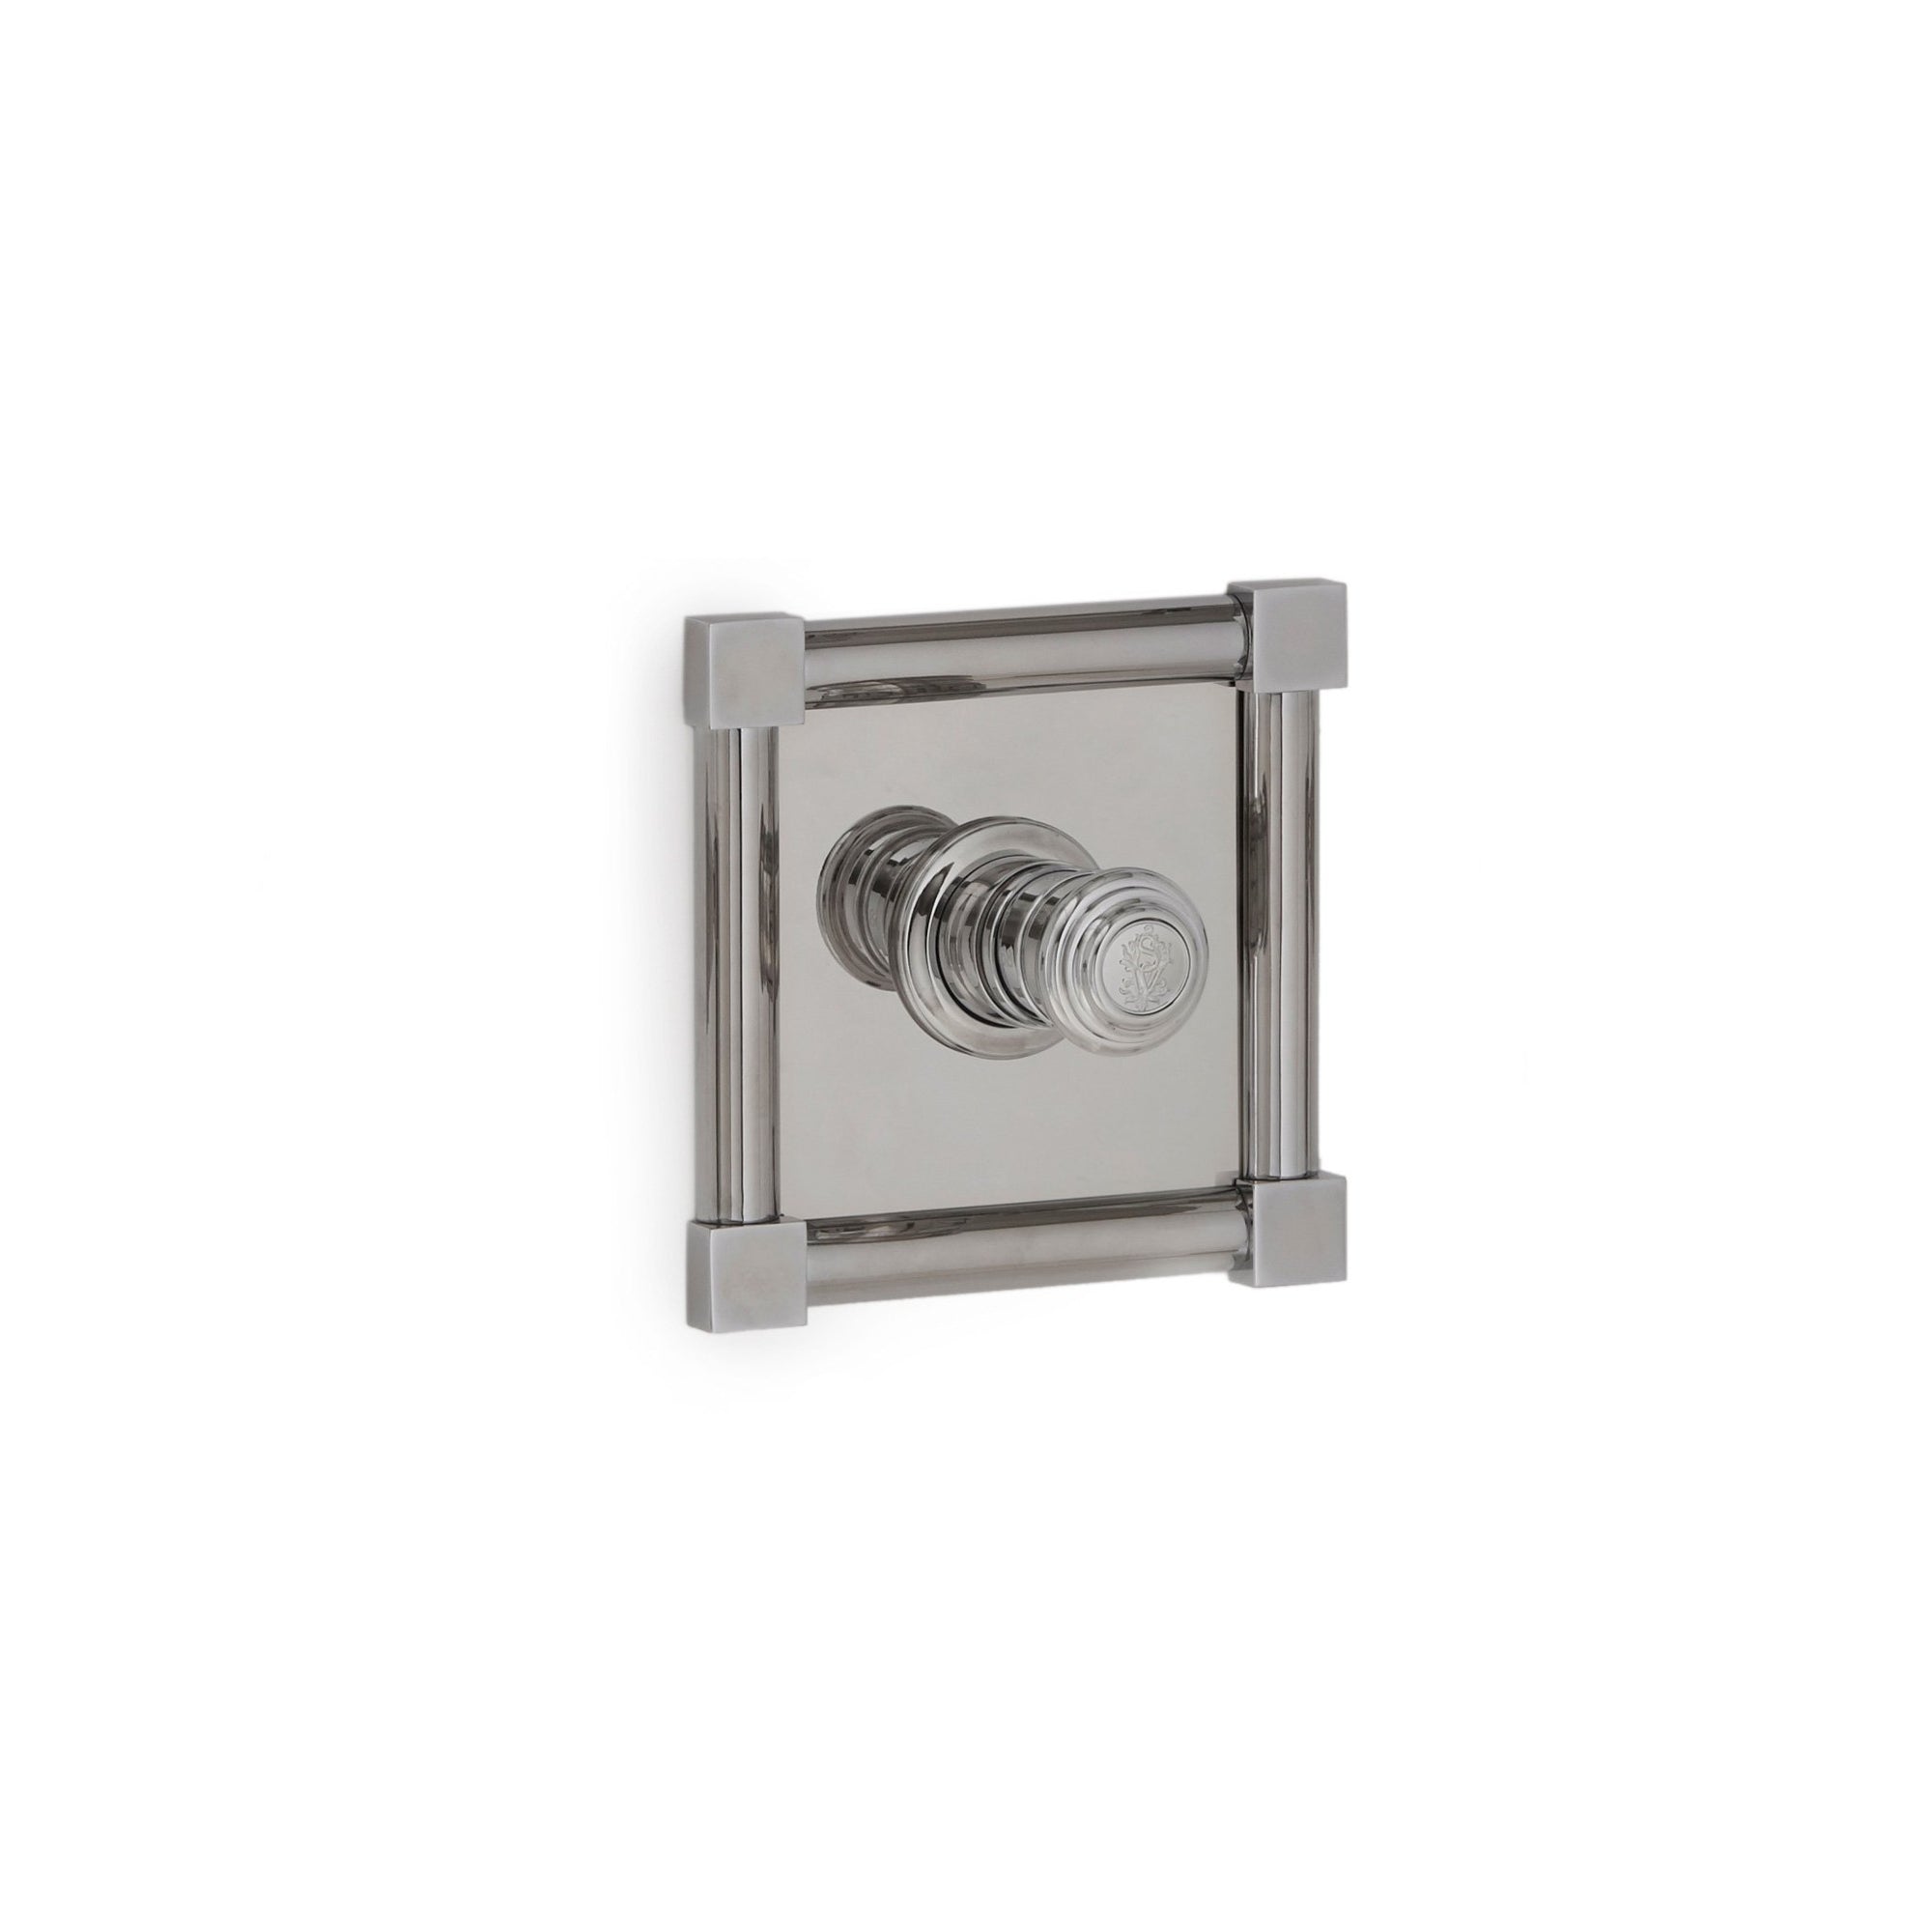 TMO01PL-LOGO-CP Sherle Wagner International Square Knuckle High Flow Thermostatic Trim in Polished Chrome metal finish